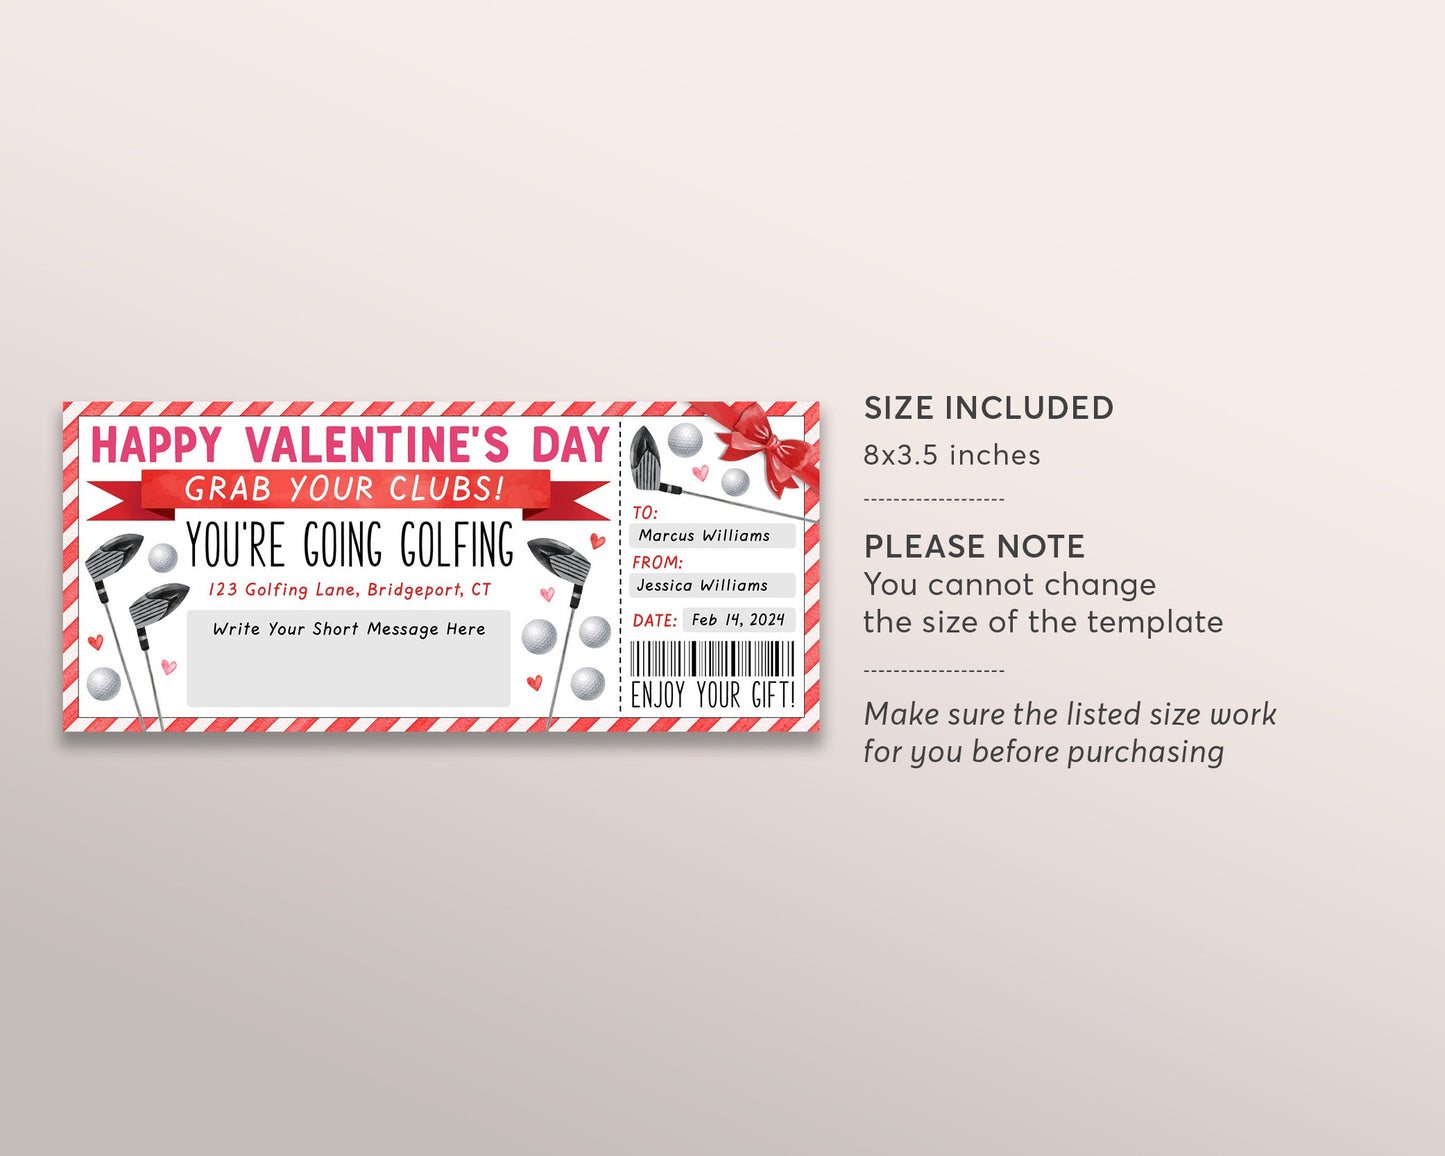 Valentine's Day Golf Trip Gift Ticket Editable Template, Surprise Anniversary Golfing Game Voucher Gift Certificate, Round of Golf For Him